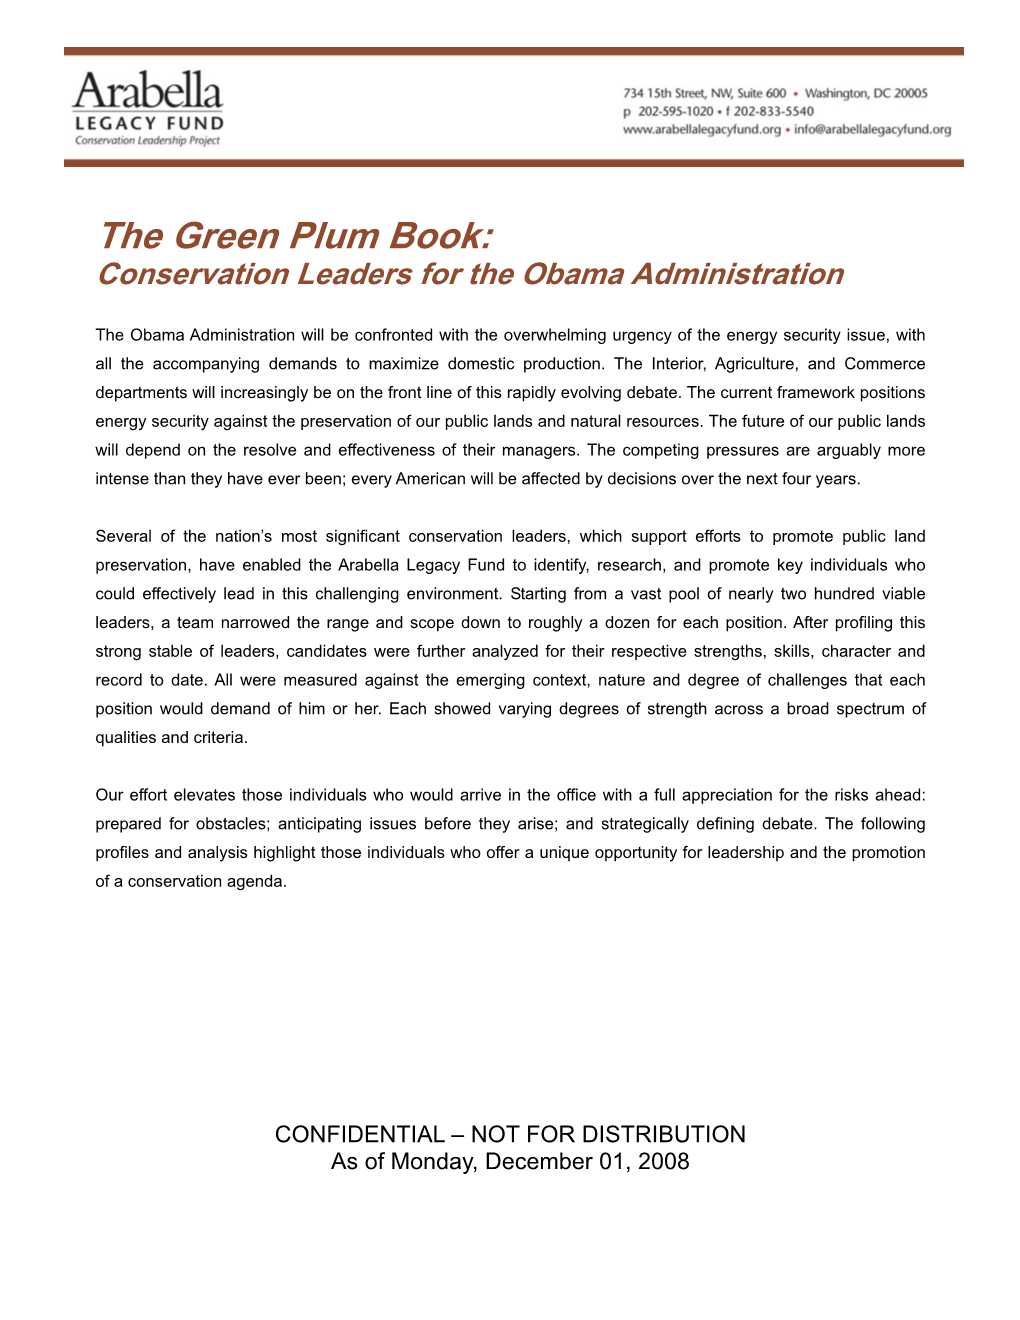 The Green Plum Book: Conservation Leaders for the Obama Administration